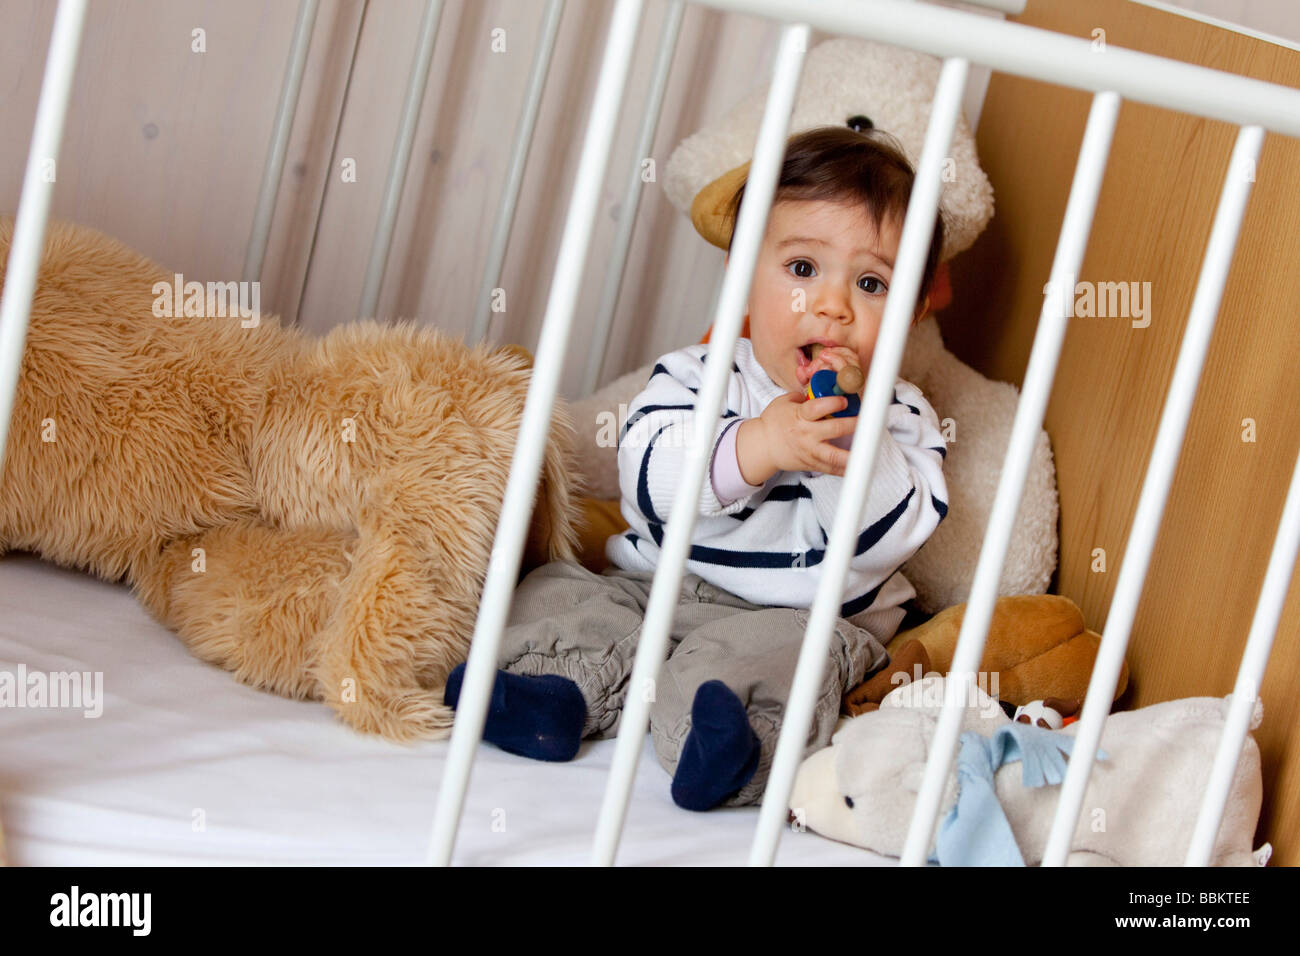 Nine-month-old baby sitting in his cot Stock Photo